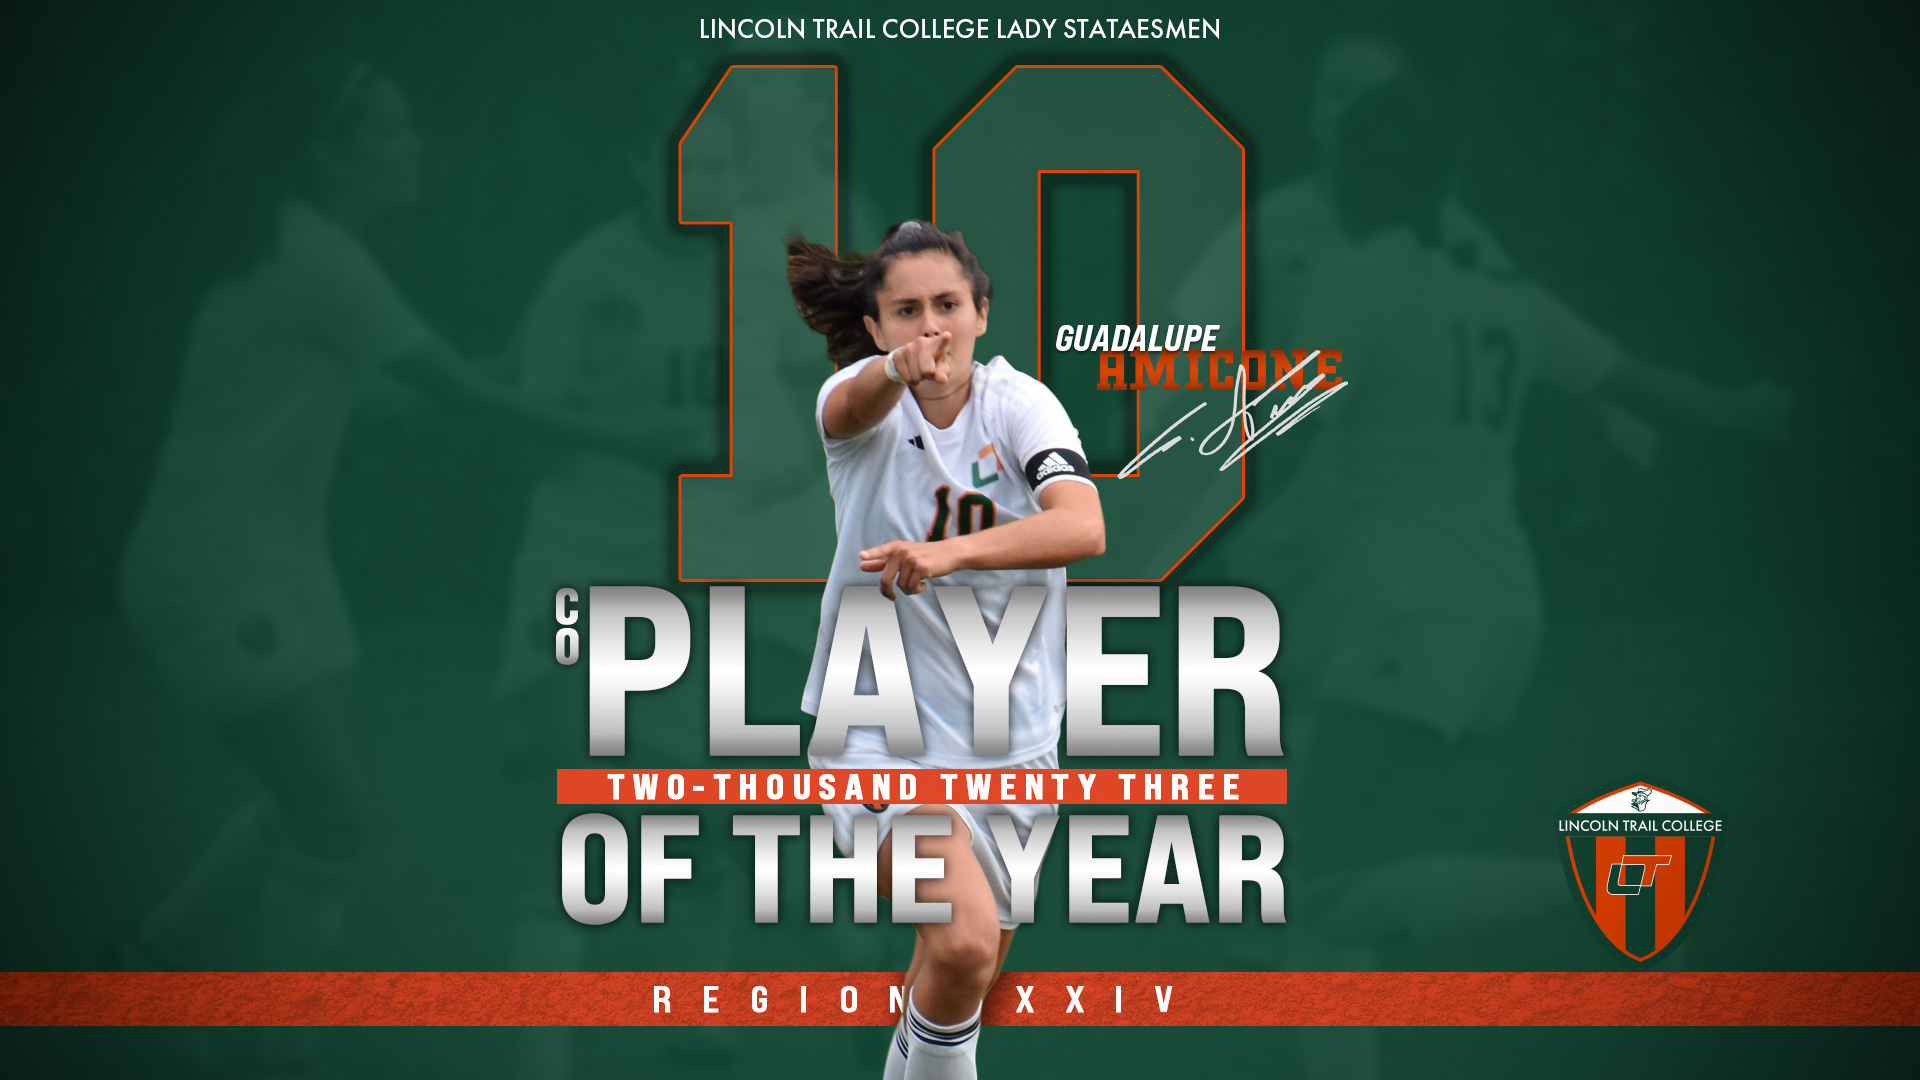 A graphic featuring 2023 Region 24 Co-Player of the Year Guadalupe Amicone. She is shown celebrating after a goal pointing forward.